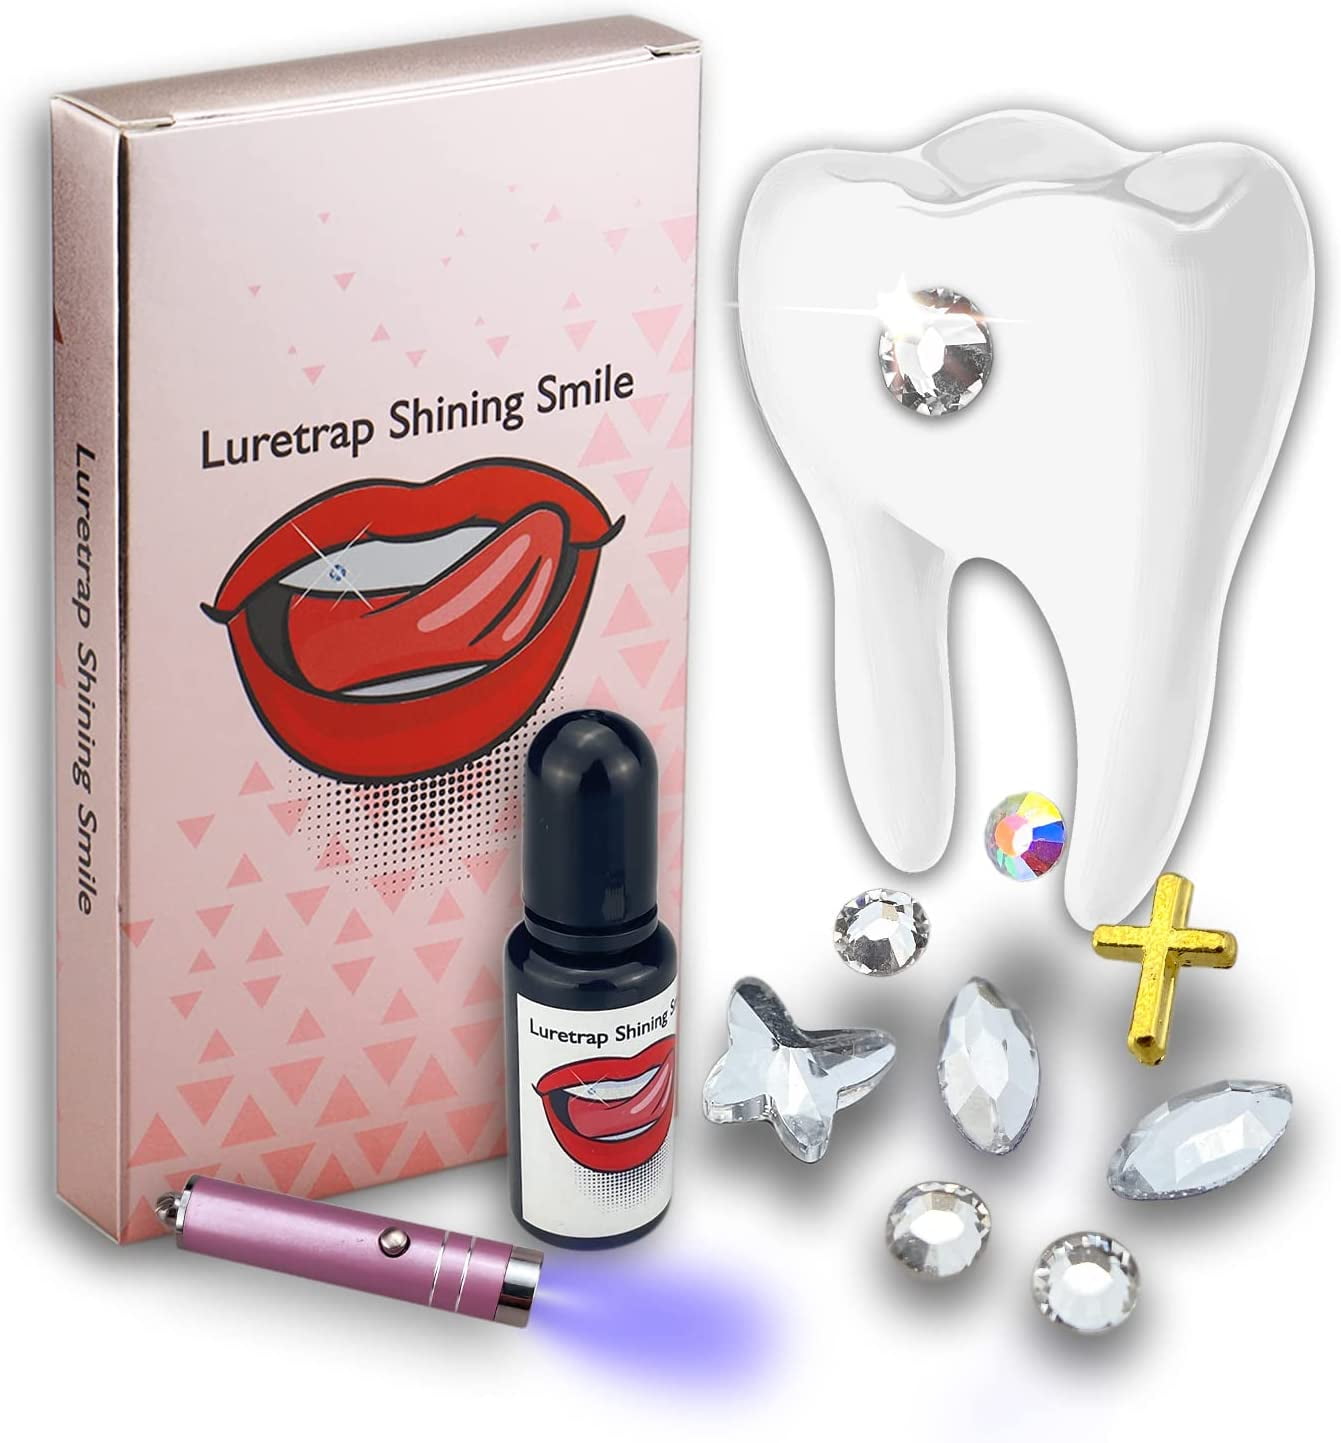 Luretrap DIY Tooth Gem Kit with GIue,200 Pieces Crystals,Crystal GIue Jewelry Starter Kit